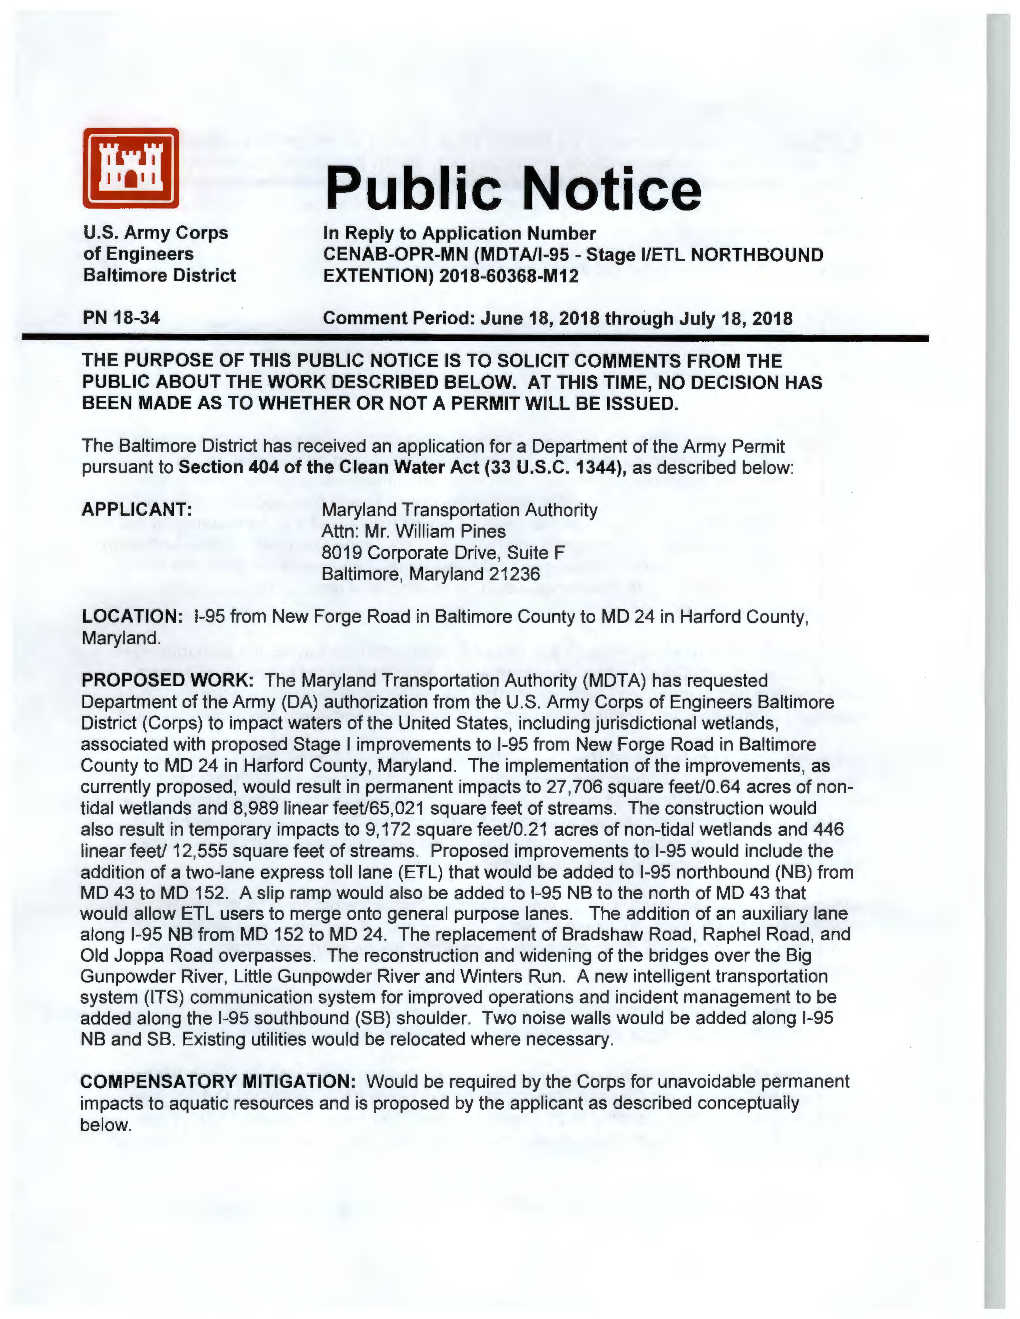 US Army Corps of Engineers Public Notice 06-18-2018